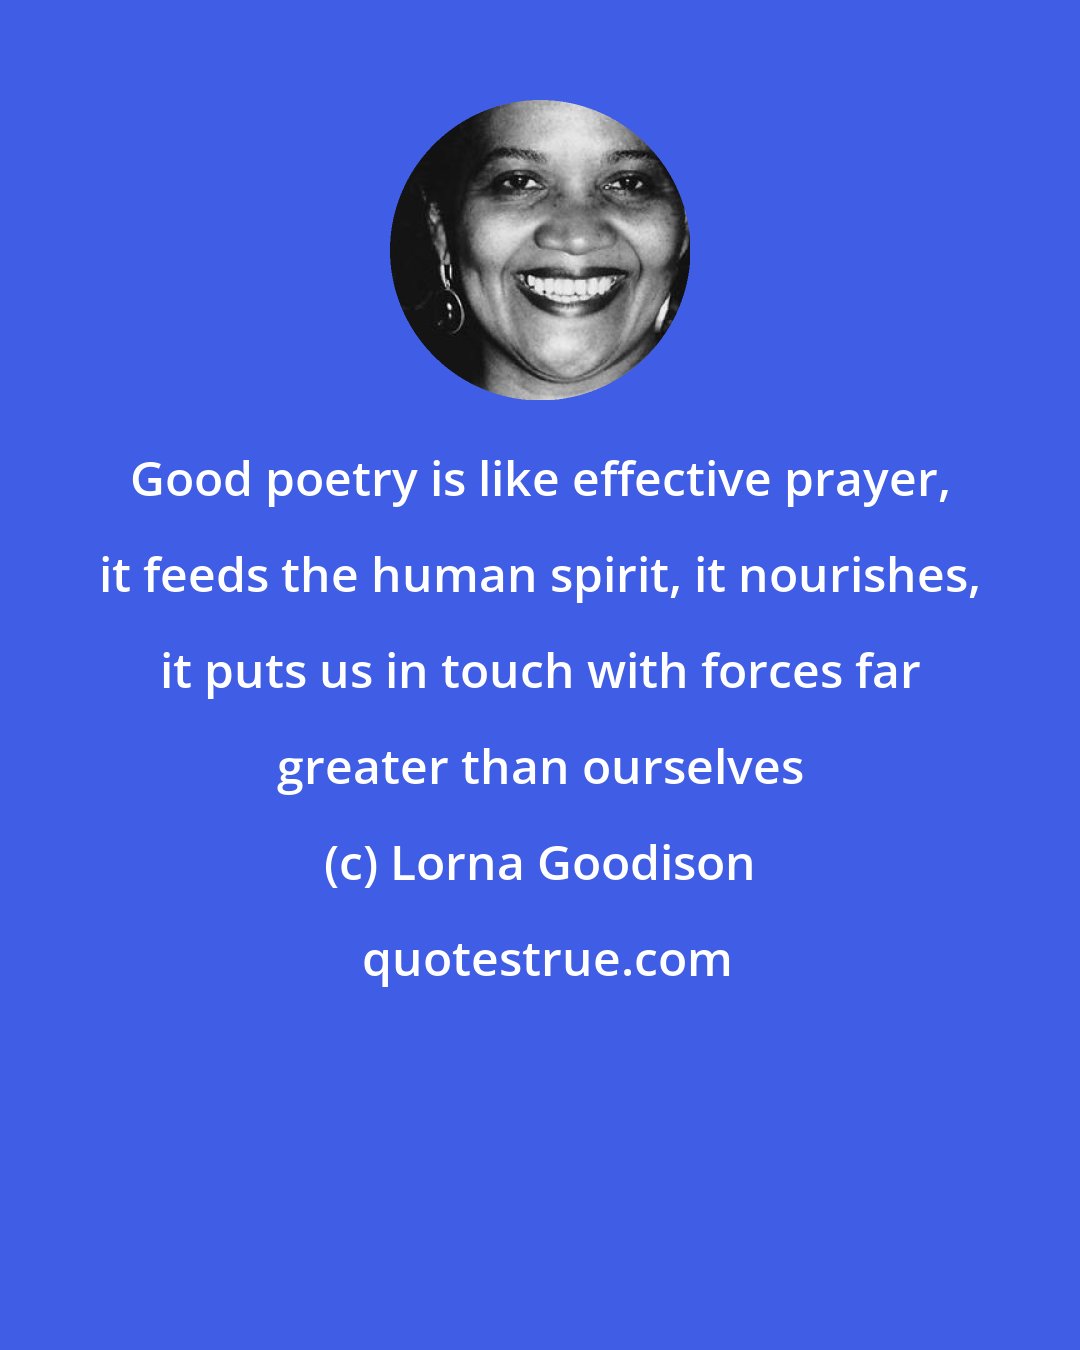 Lorna Goodison: Good poetry is like effective prayer, it feeds the human spirit, it nourishes, it puts us in touch with forces far greater than ourselves